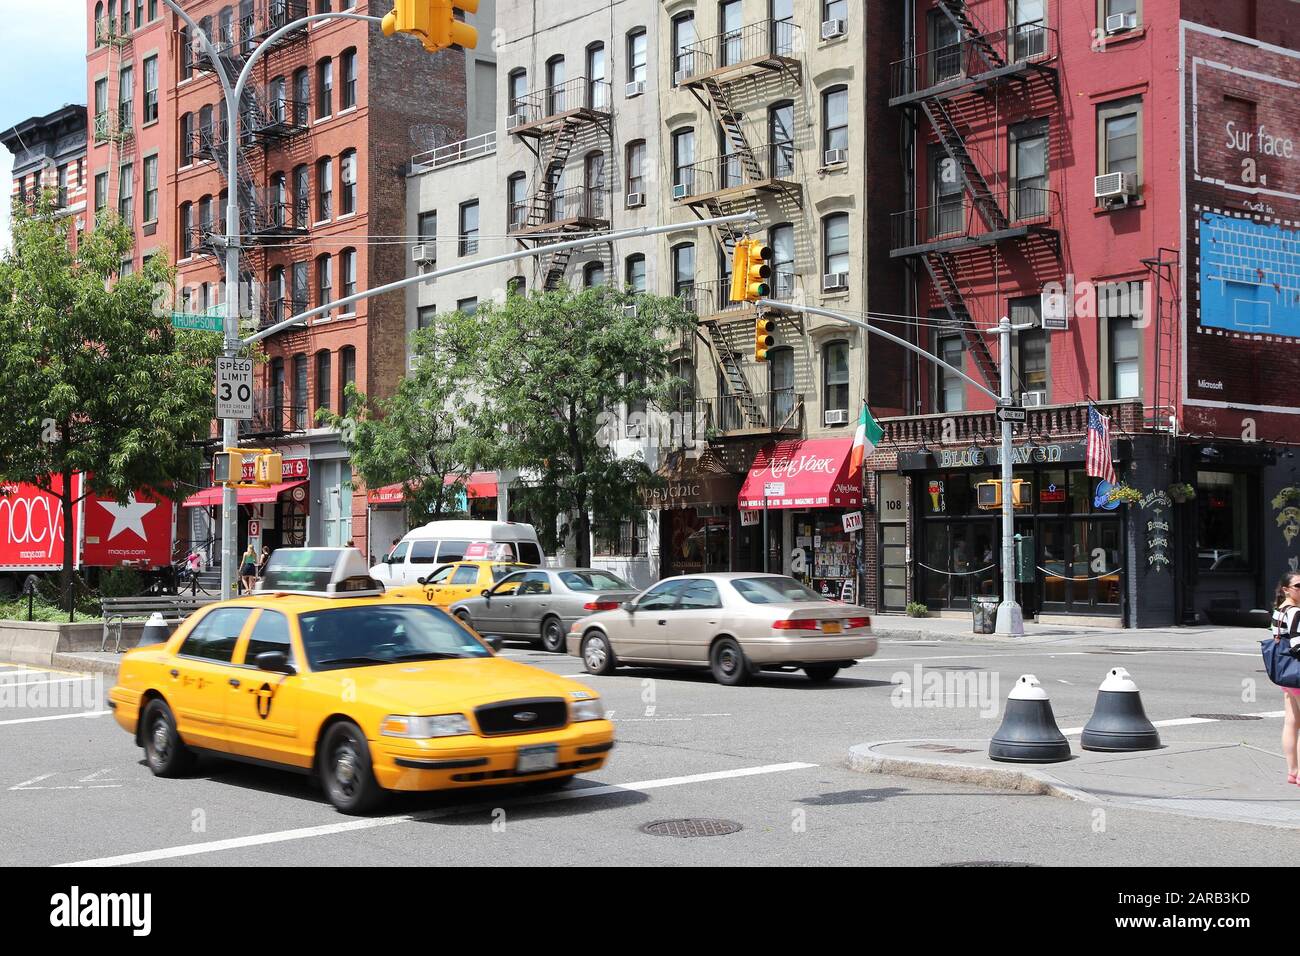 NEW YORK, USA - JULY 2, 2013: People ride yellow taxi in SoHo, New York. As of 2012 there were 13,237 yellow taxi cabs registered in New York City. Stock Photo